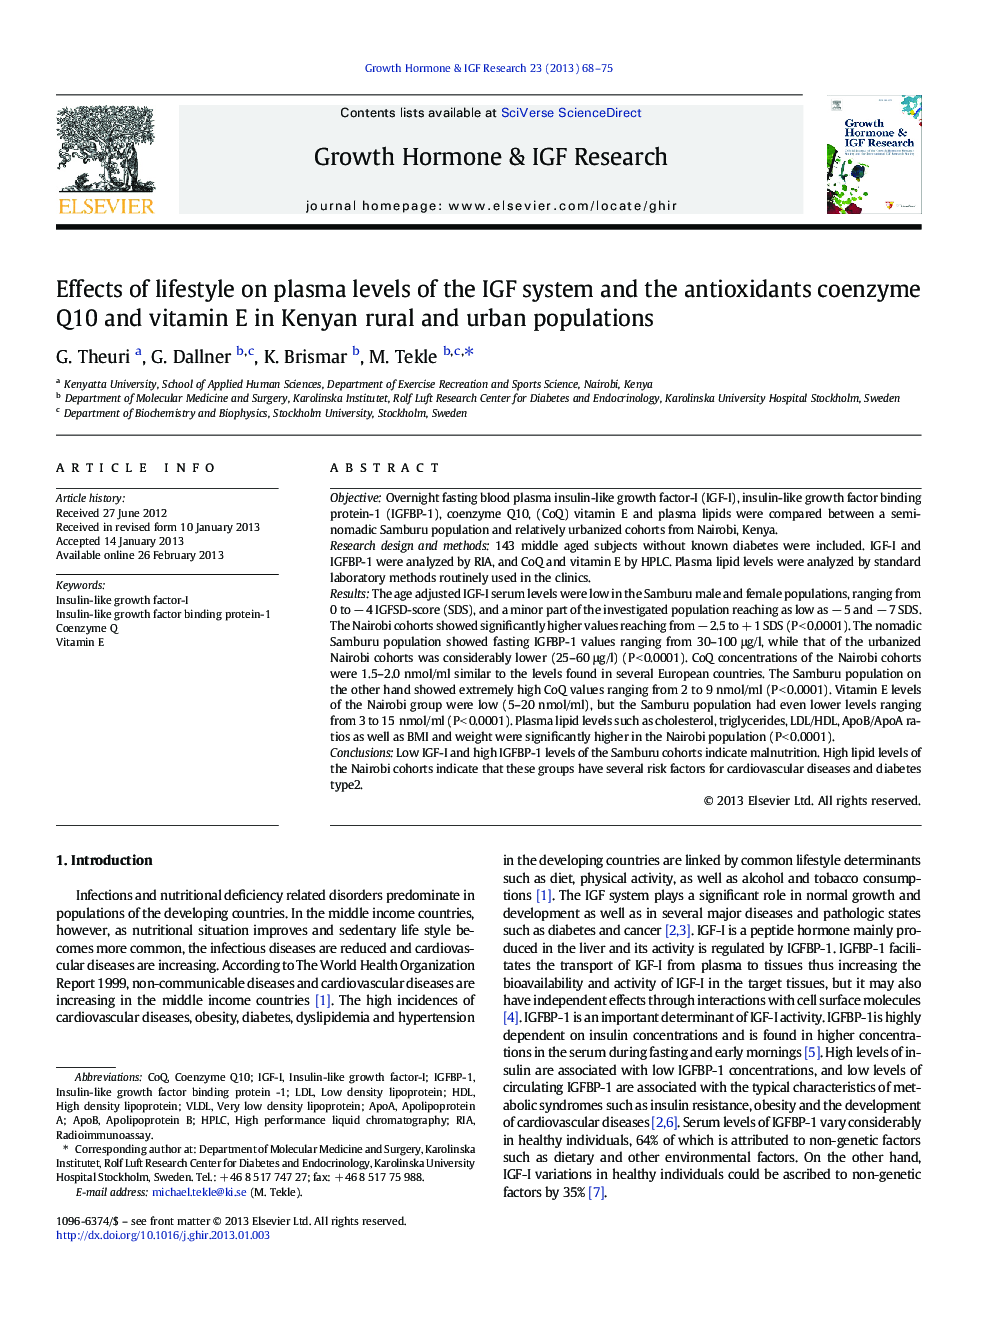 Effects of lifestyle on plasma levels of the IGF system and the antioxidants coenzyme Q10 and vitamin E in Kenyan rural and urban populations